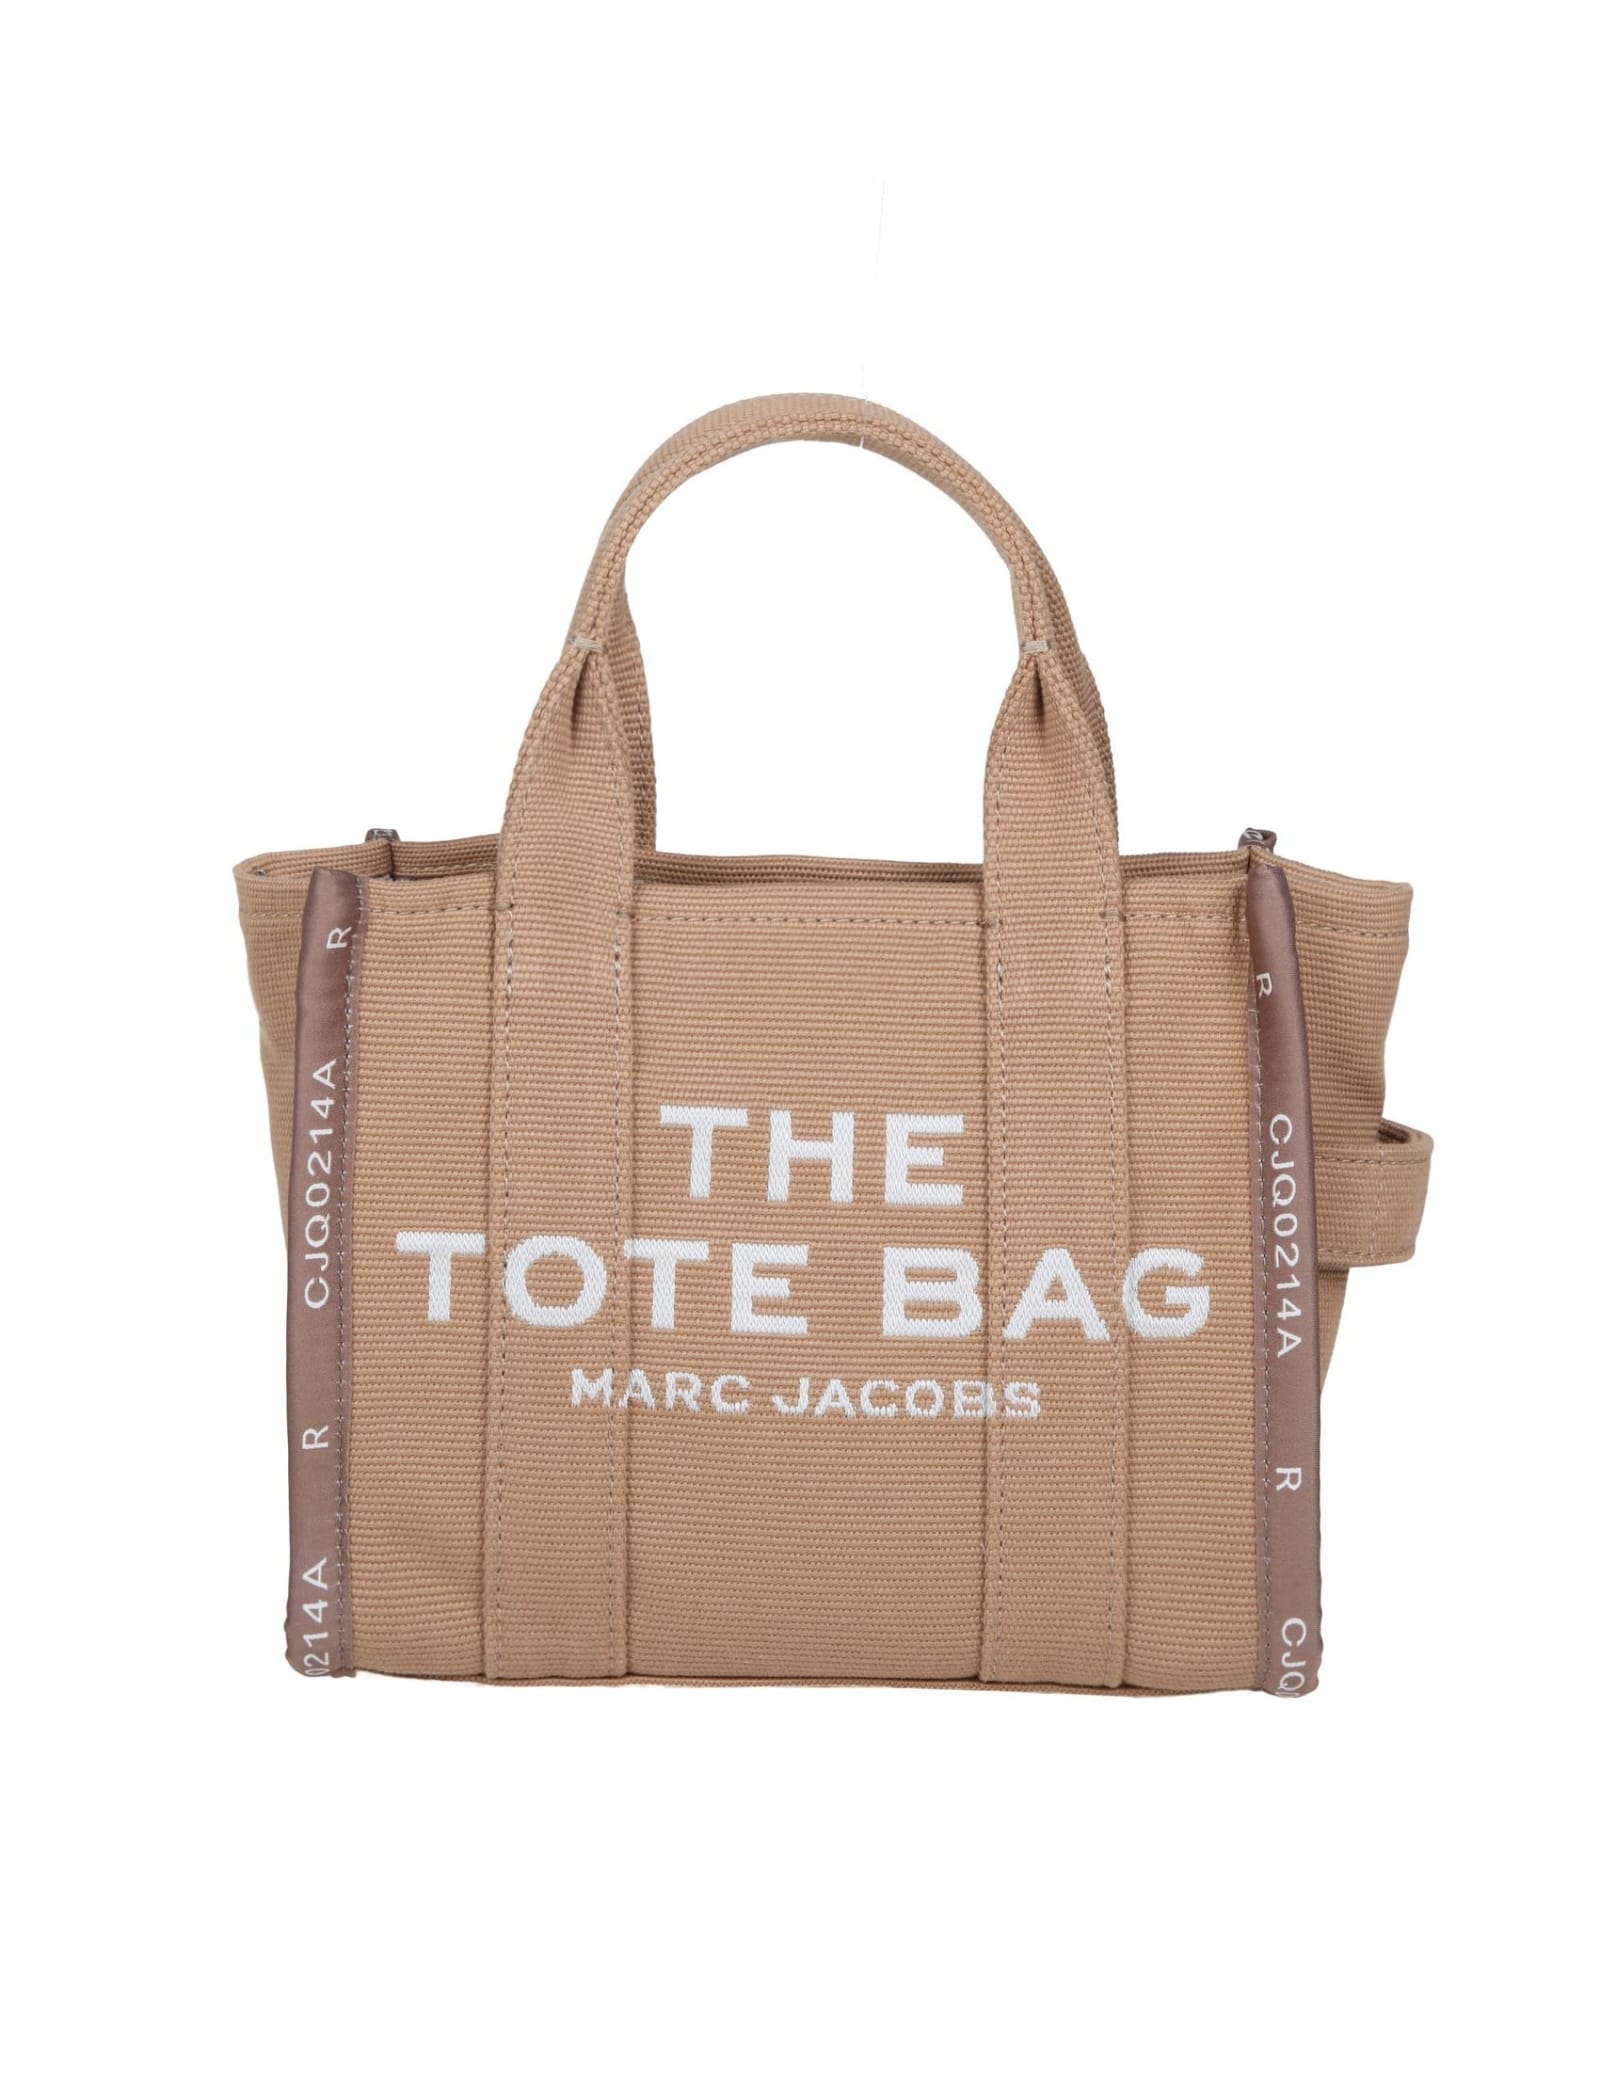 MARC JACOBS THE MINI TOTE IN JACQUARD COLOR CAMEL